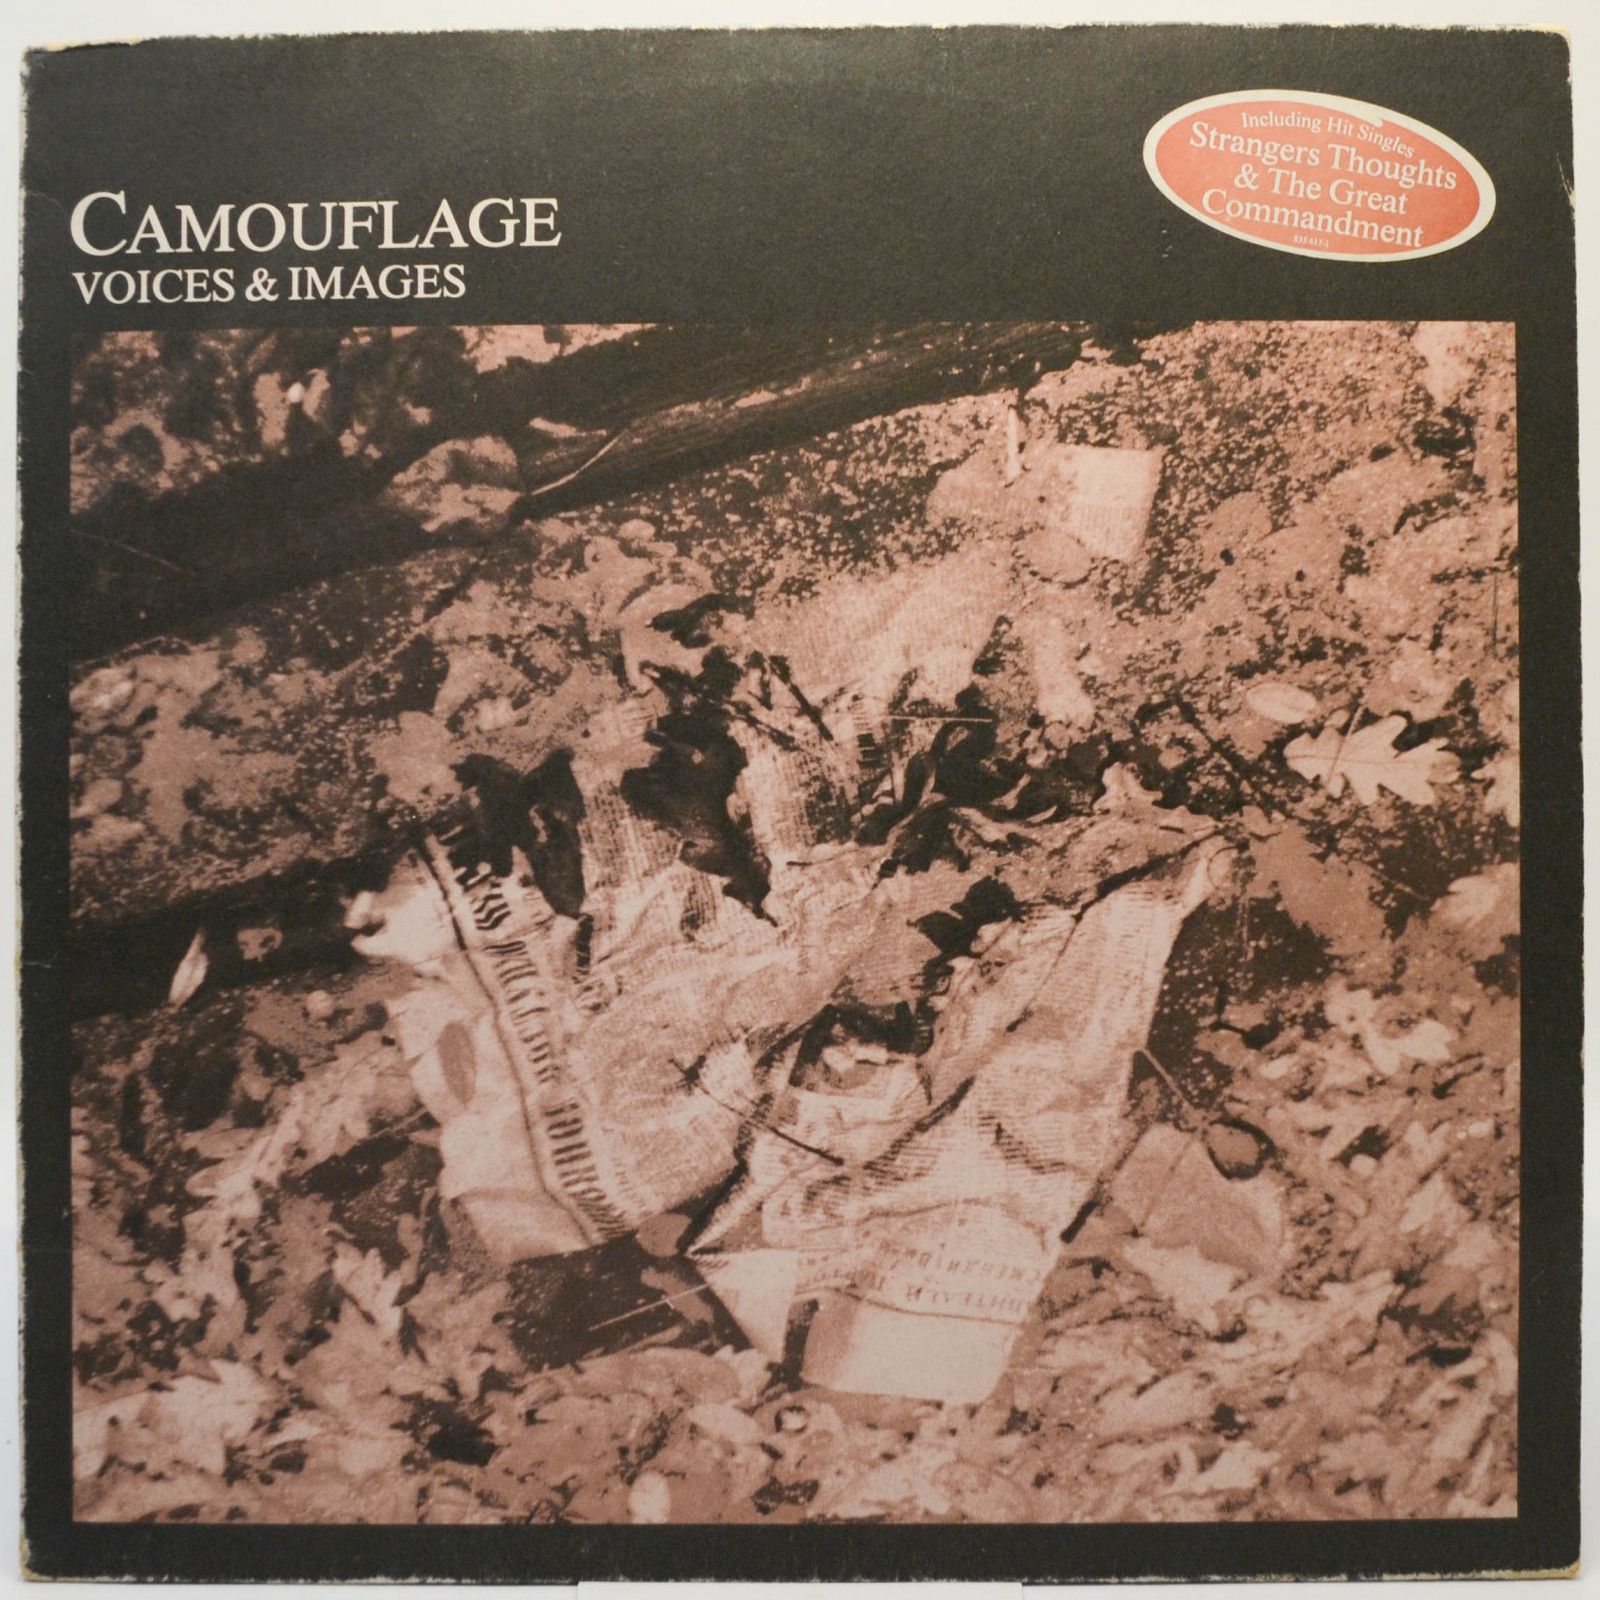 Camouflage — Voices & Images, 1988